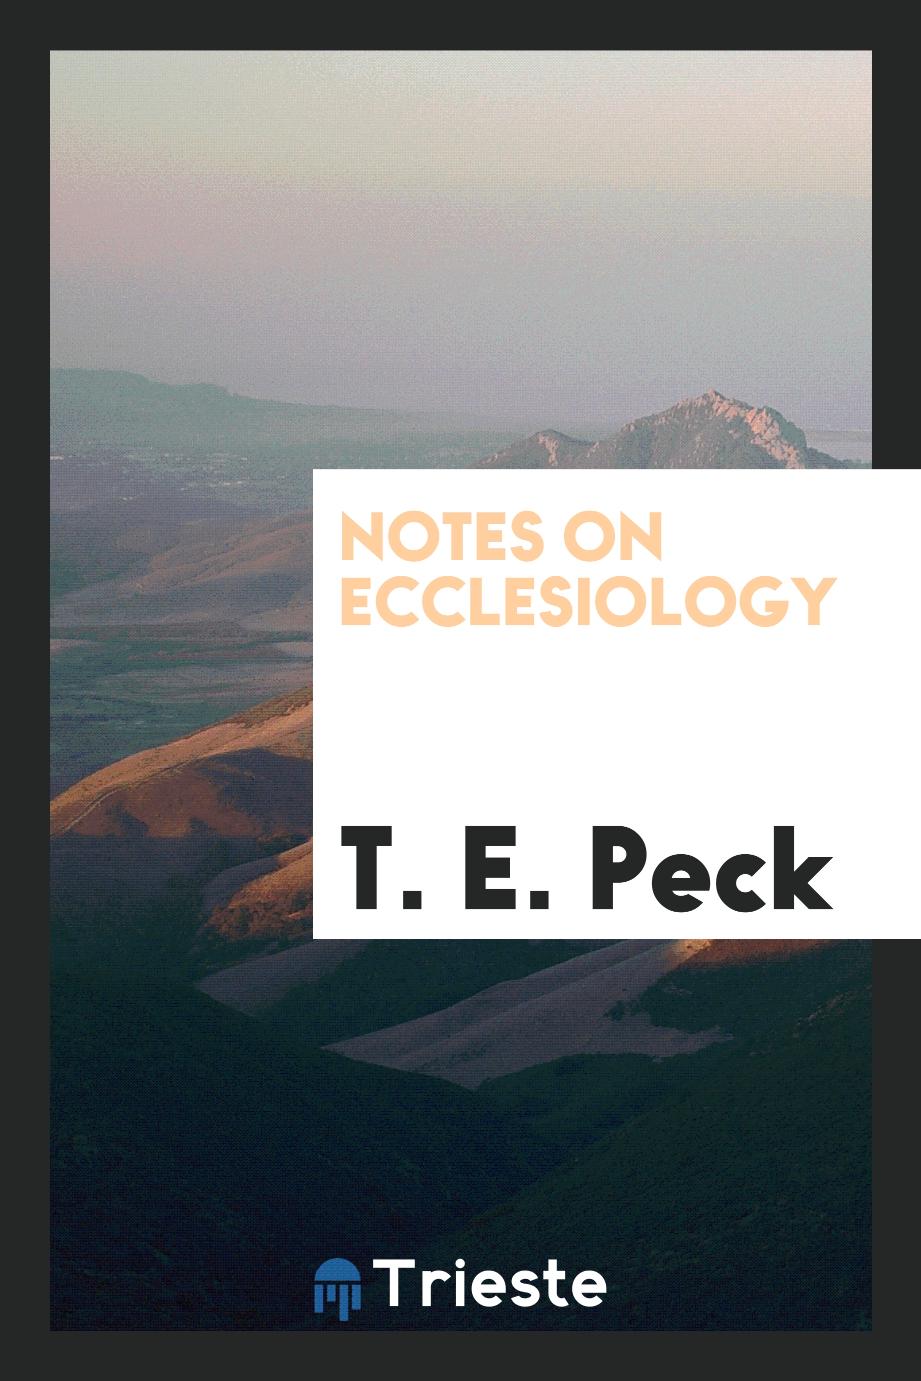 Notes on ecclesiology